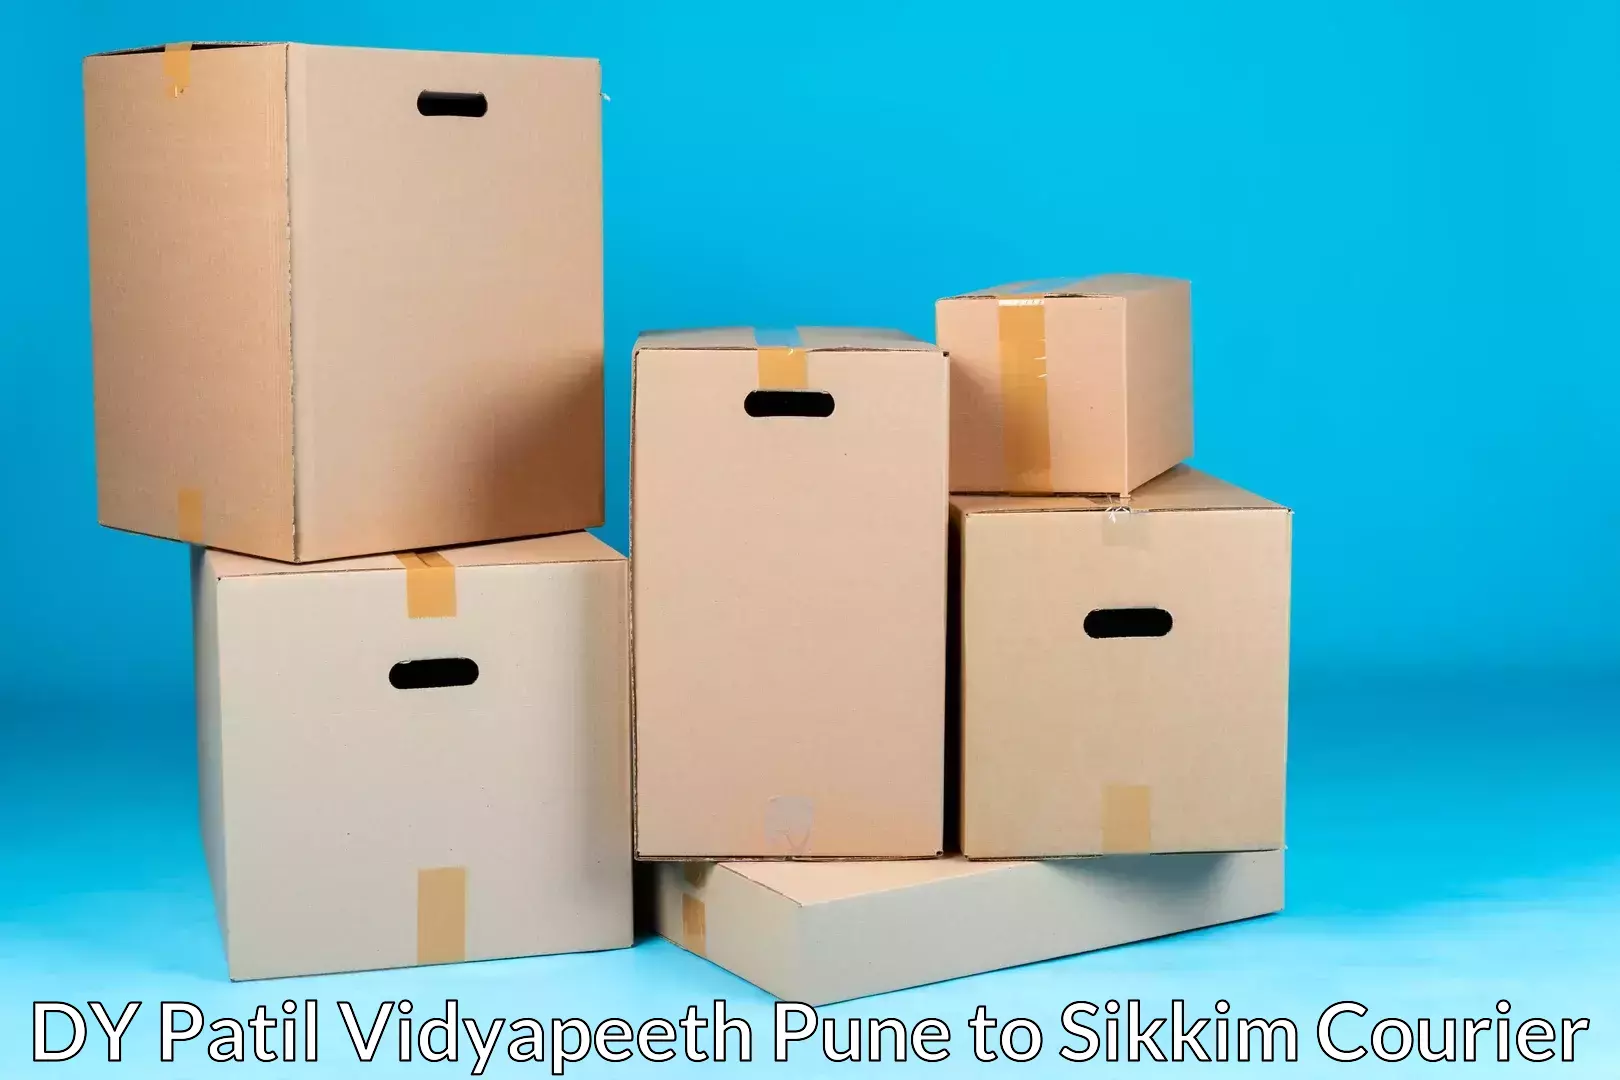 Efficient packing and moving DY Patil Vidyapeeth Pune to Pelling